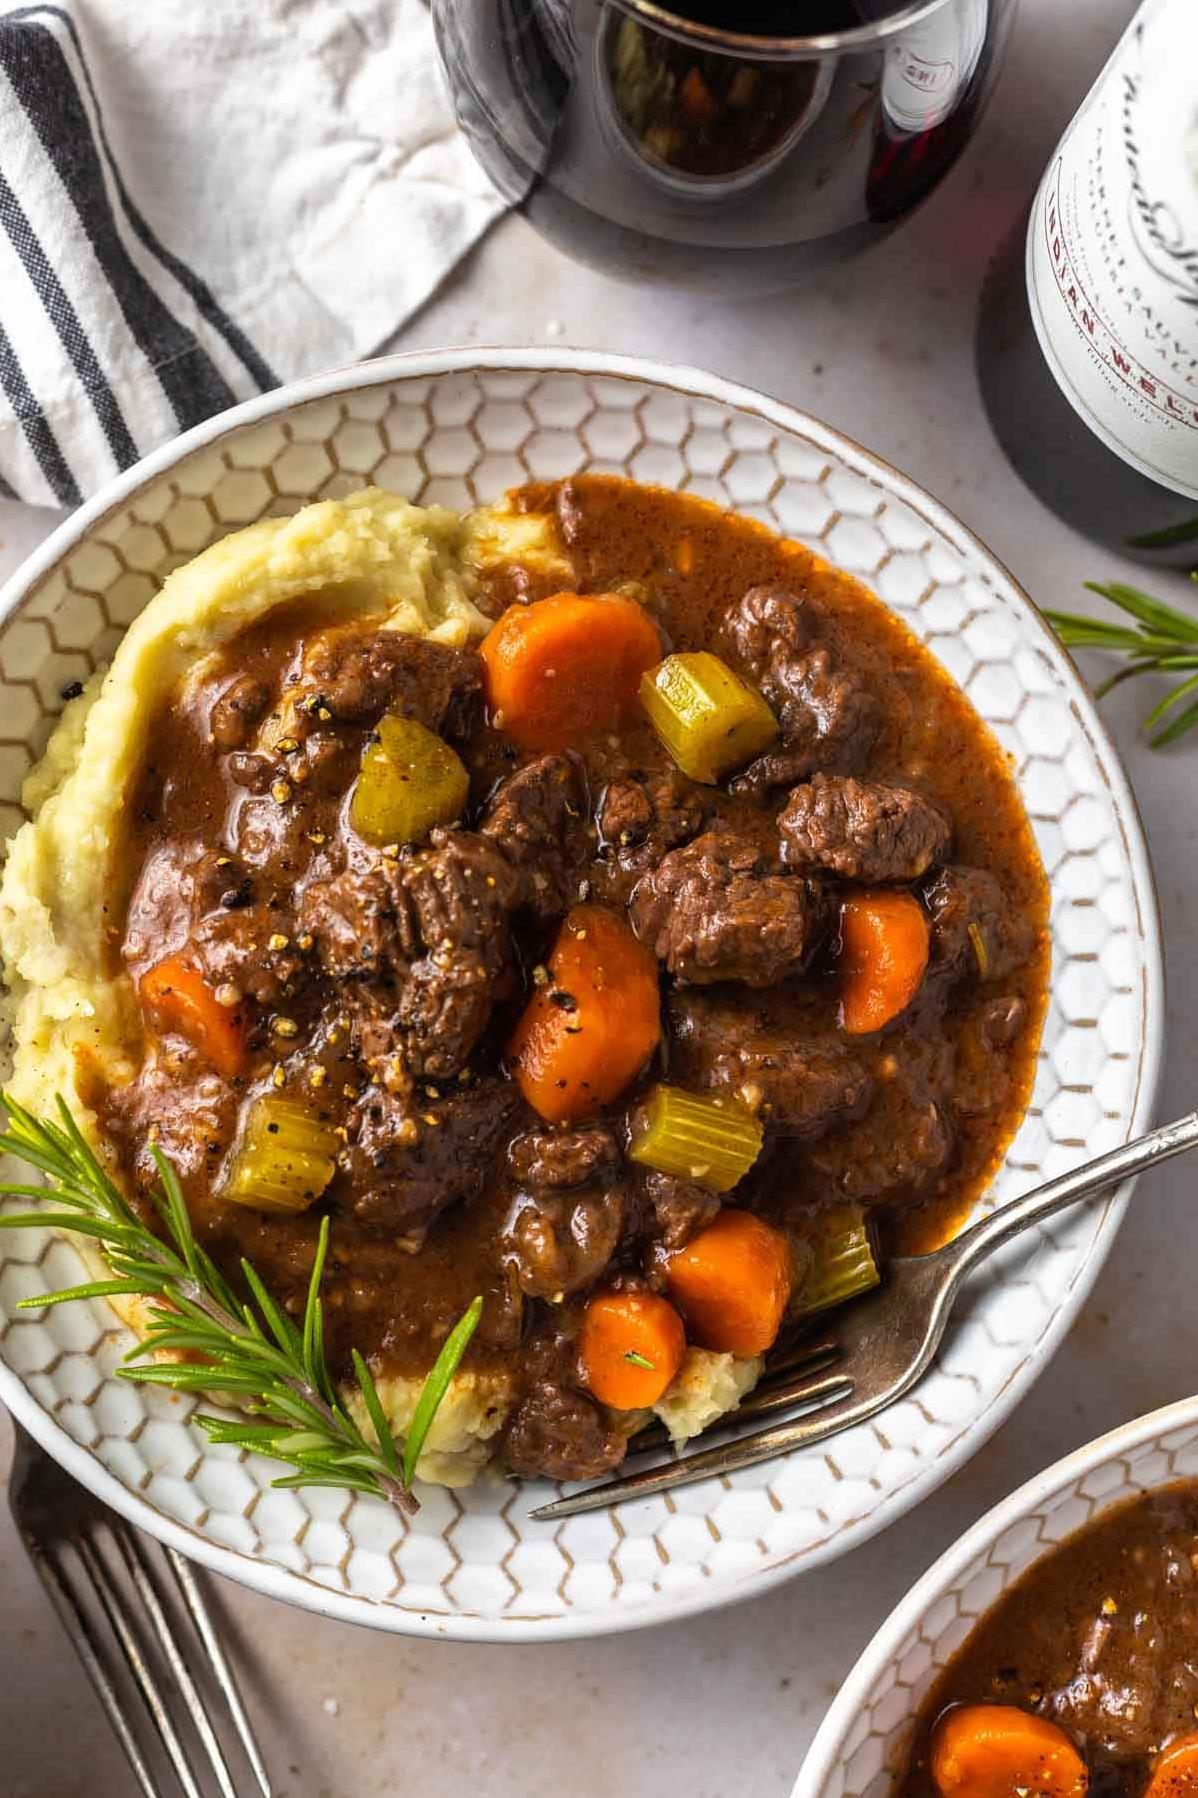  A mouth-watering bowl of beef stew is the ultimate comfort food on a chilly day.